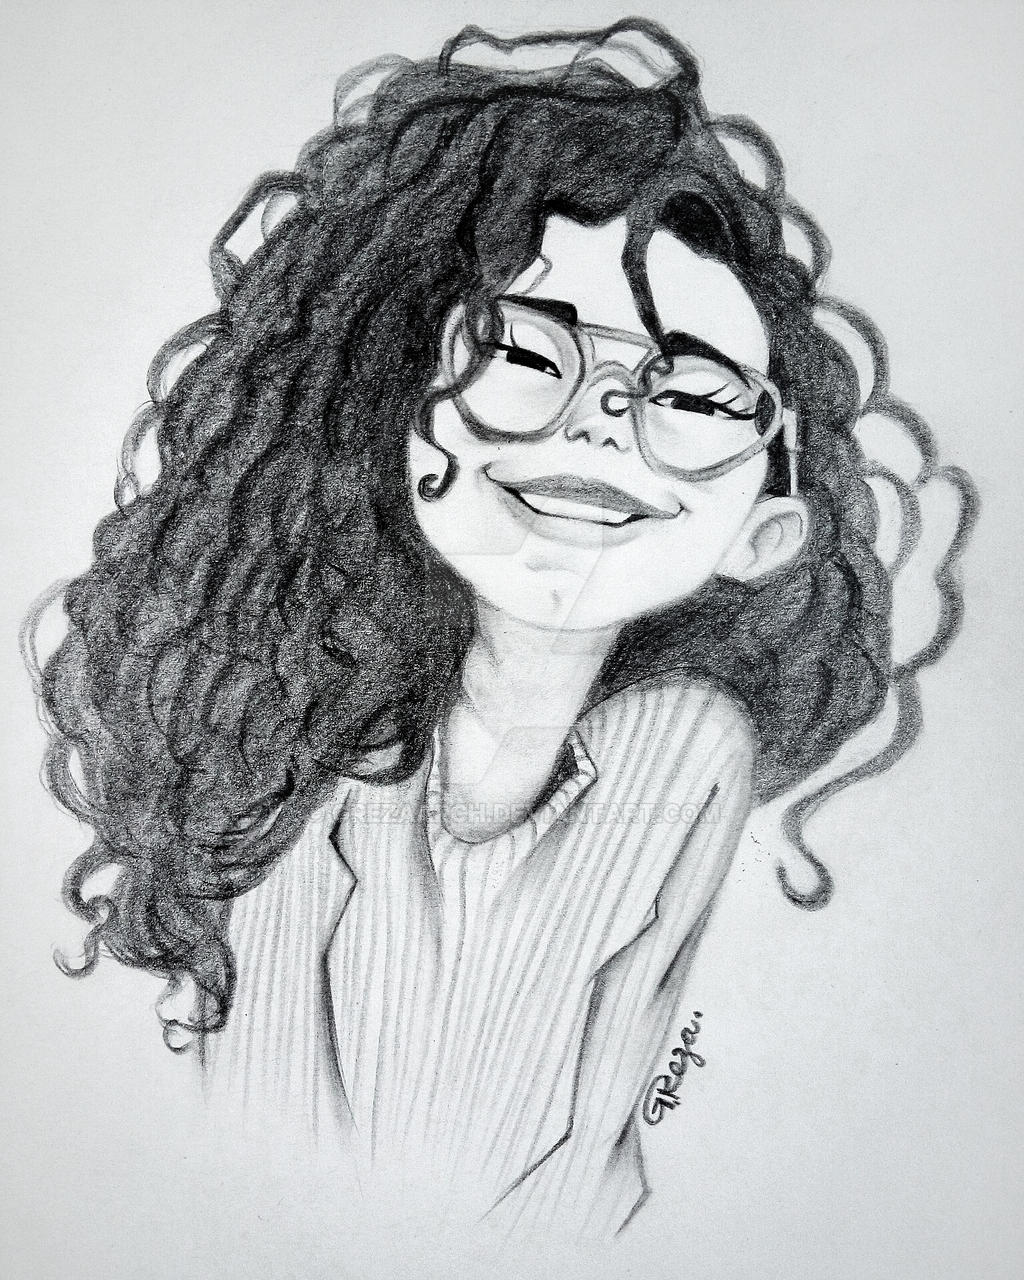  Curly  Hair  Girl  by GRezaArch on DeviantArt